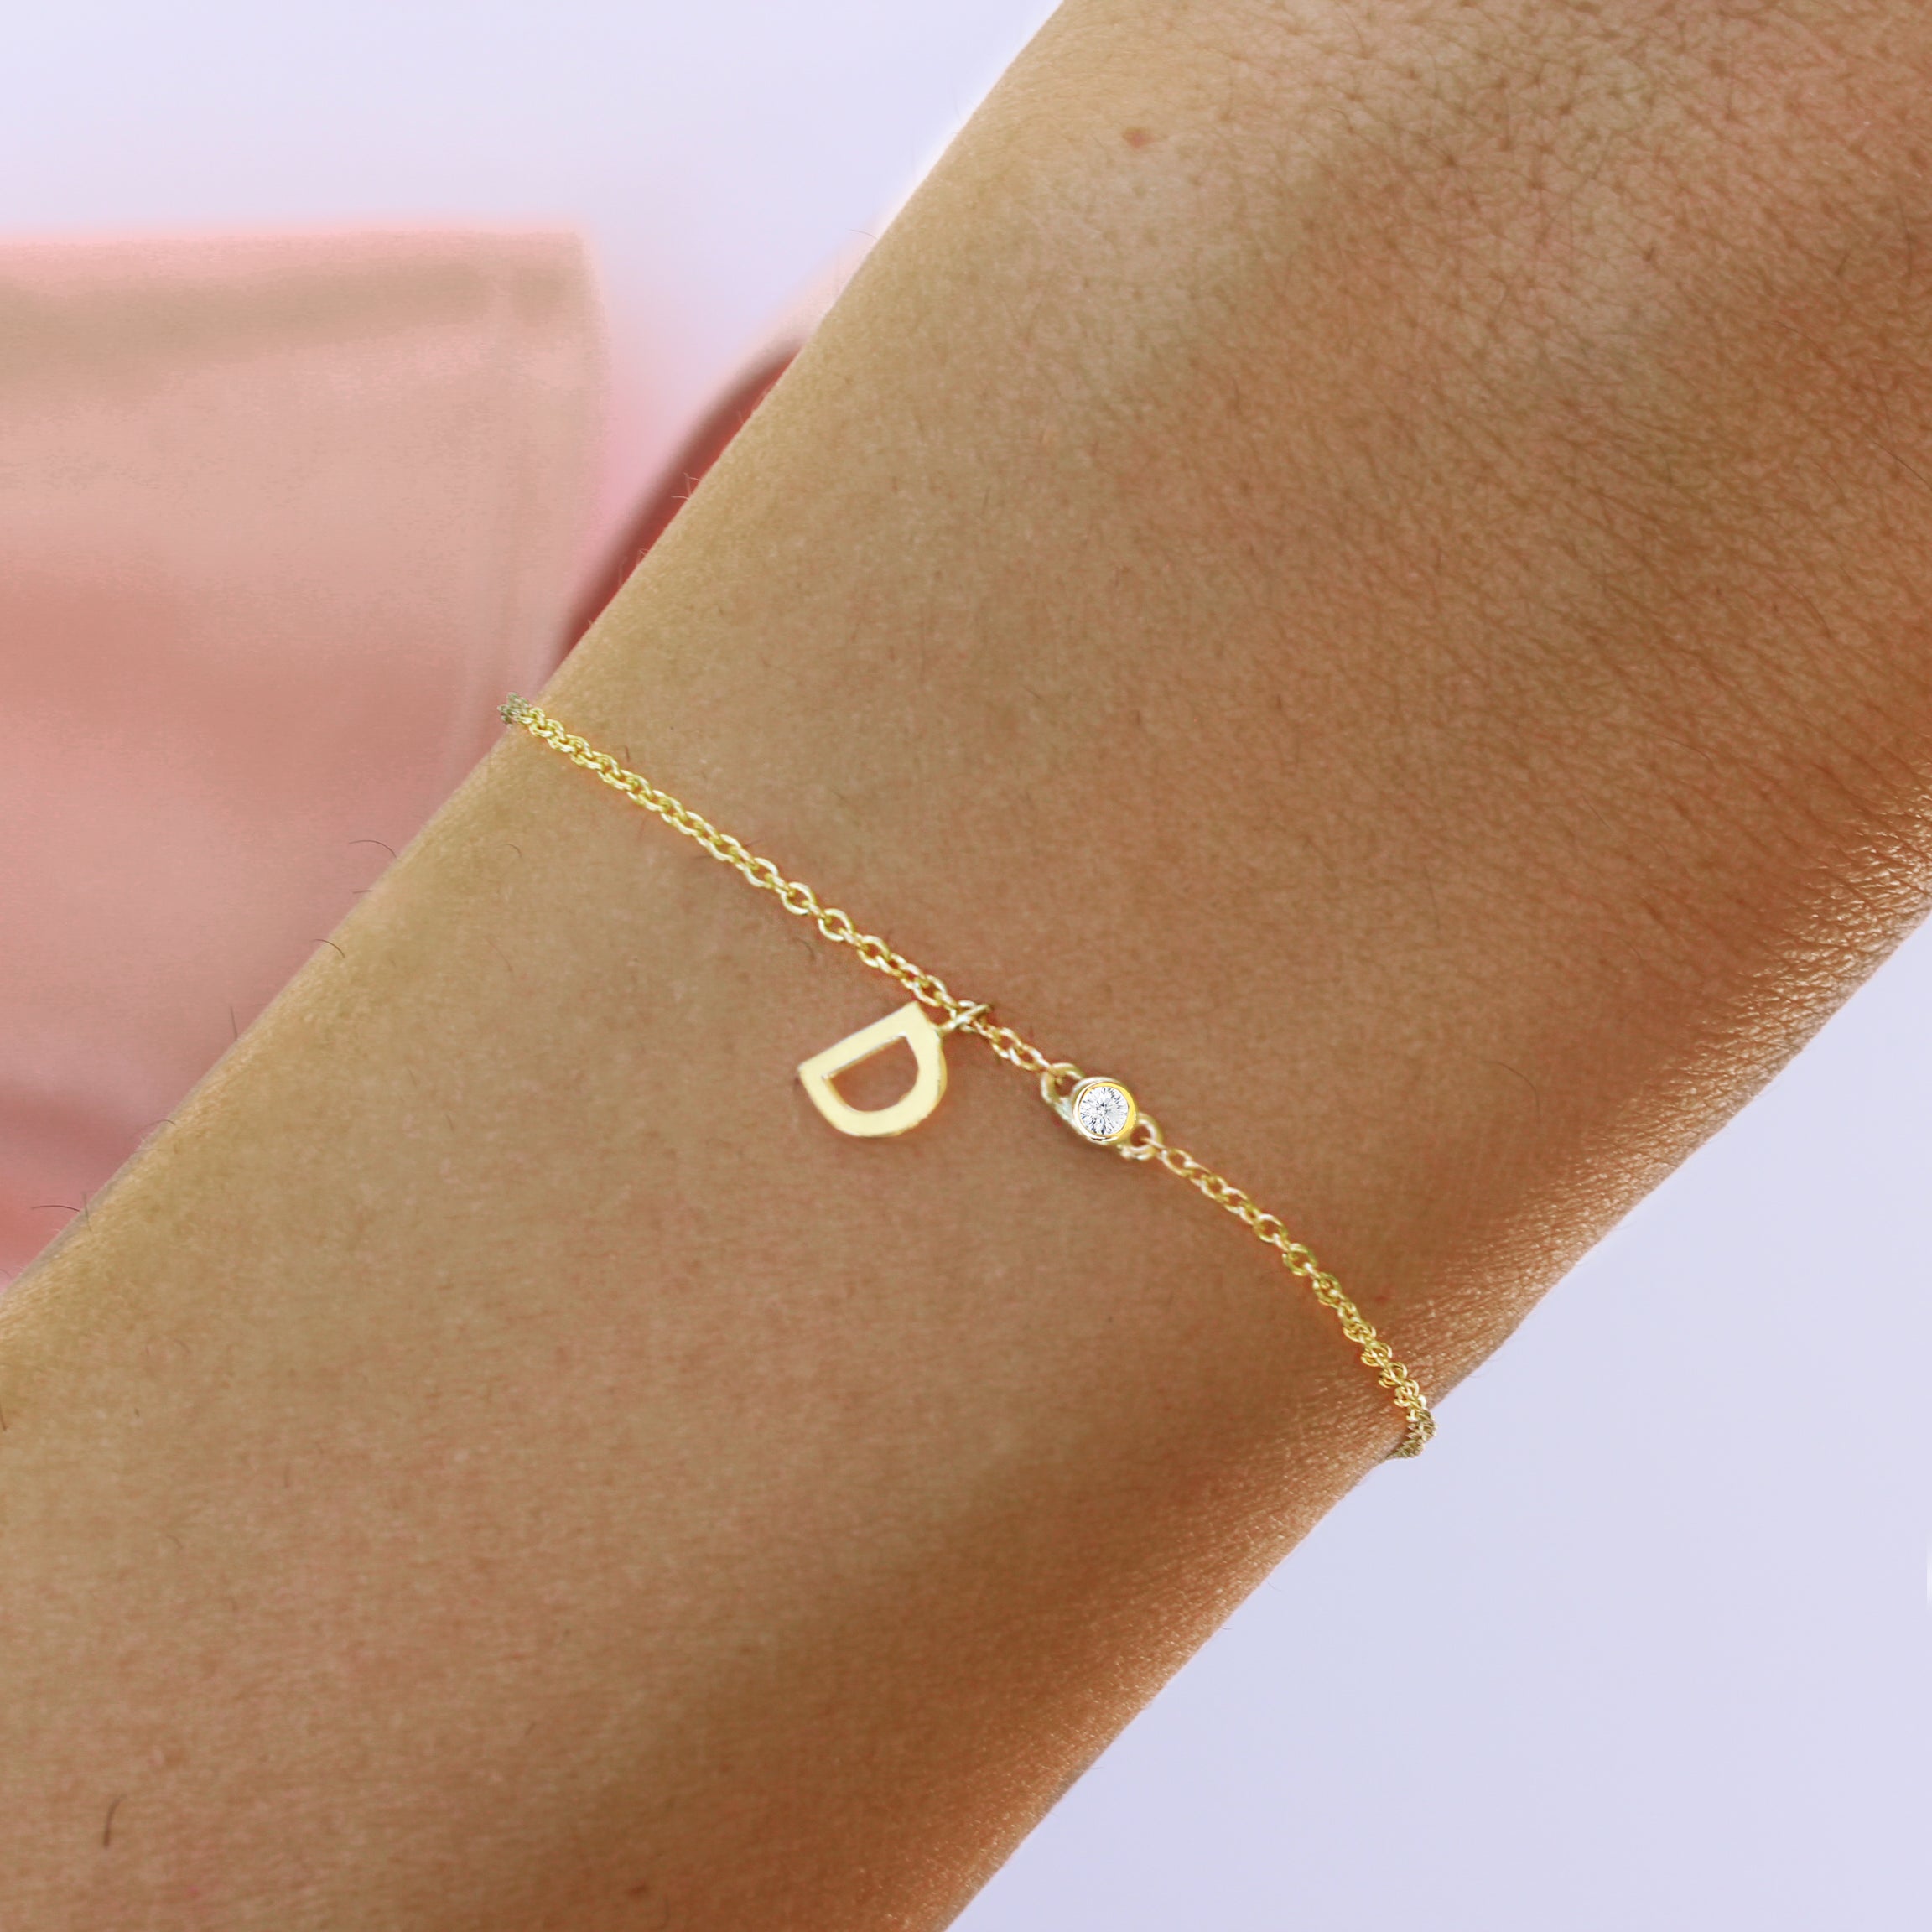 Mini Initial Letter Personalized Bracelet / Necklace 14K Gold with Diamond / Birthstone Necklace 42cm